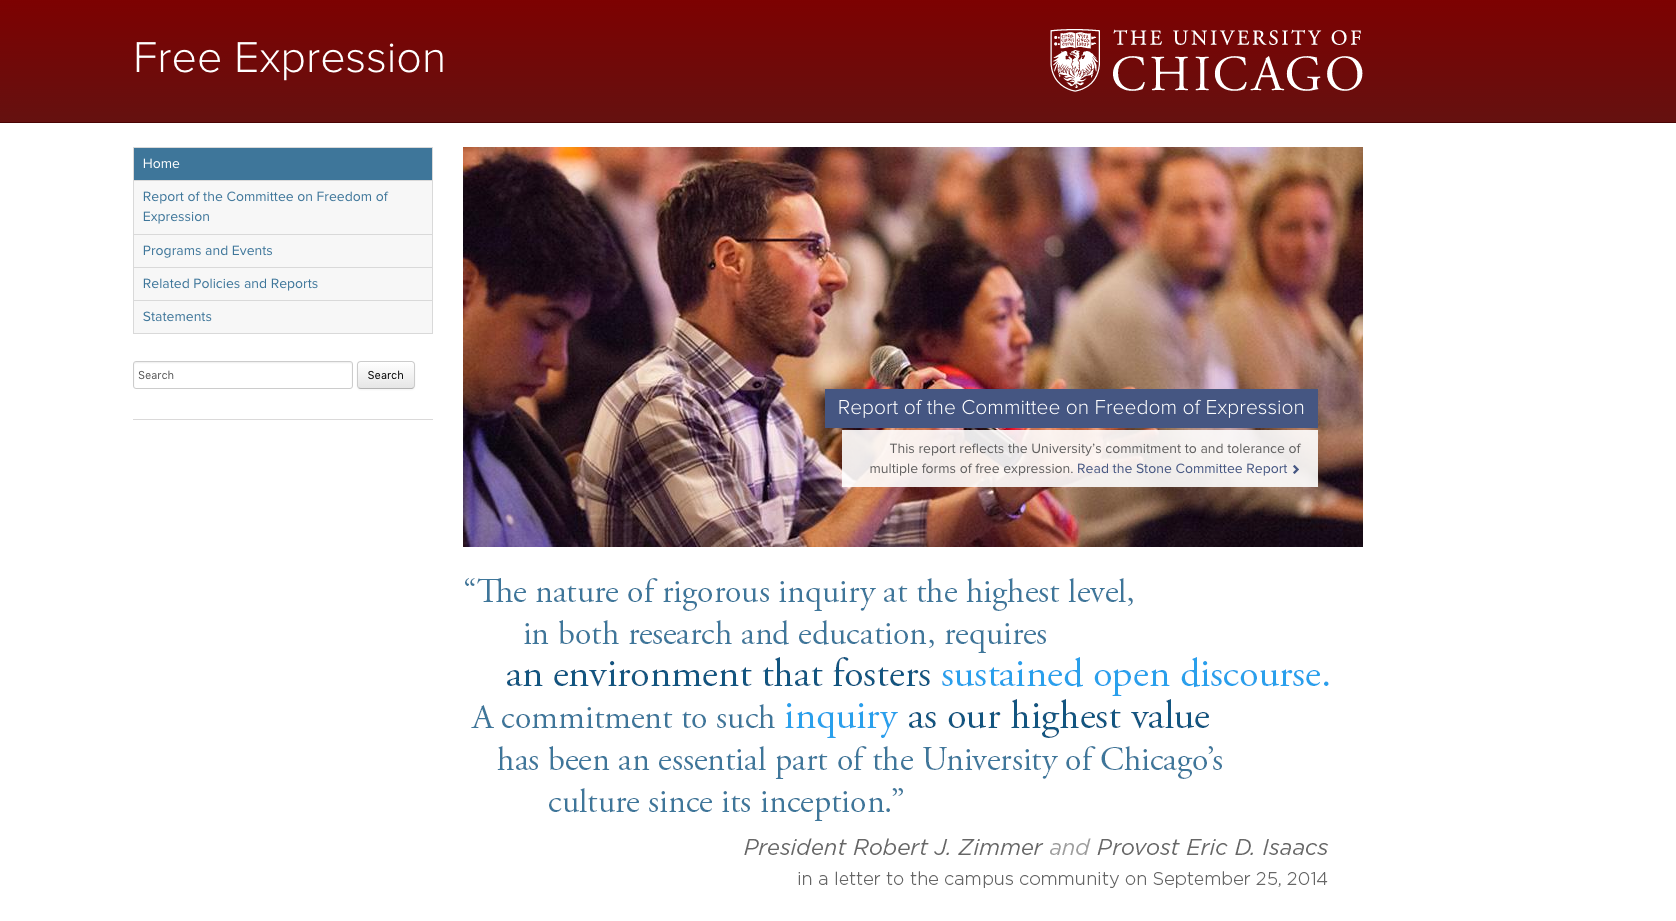 Webpage found in letter to incoming freshmen at the University of Chicago 